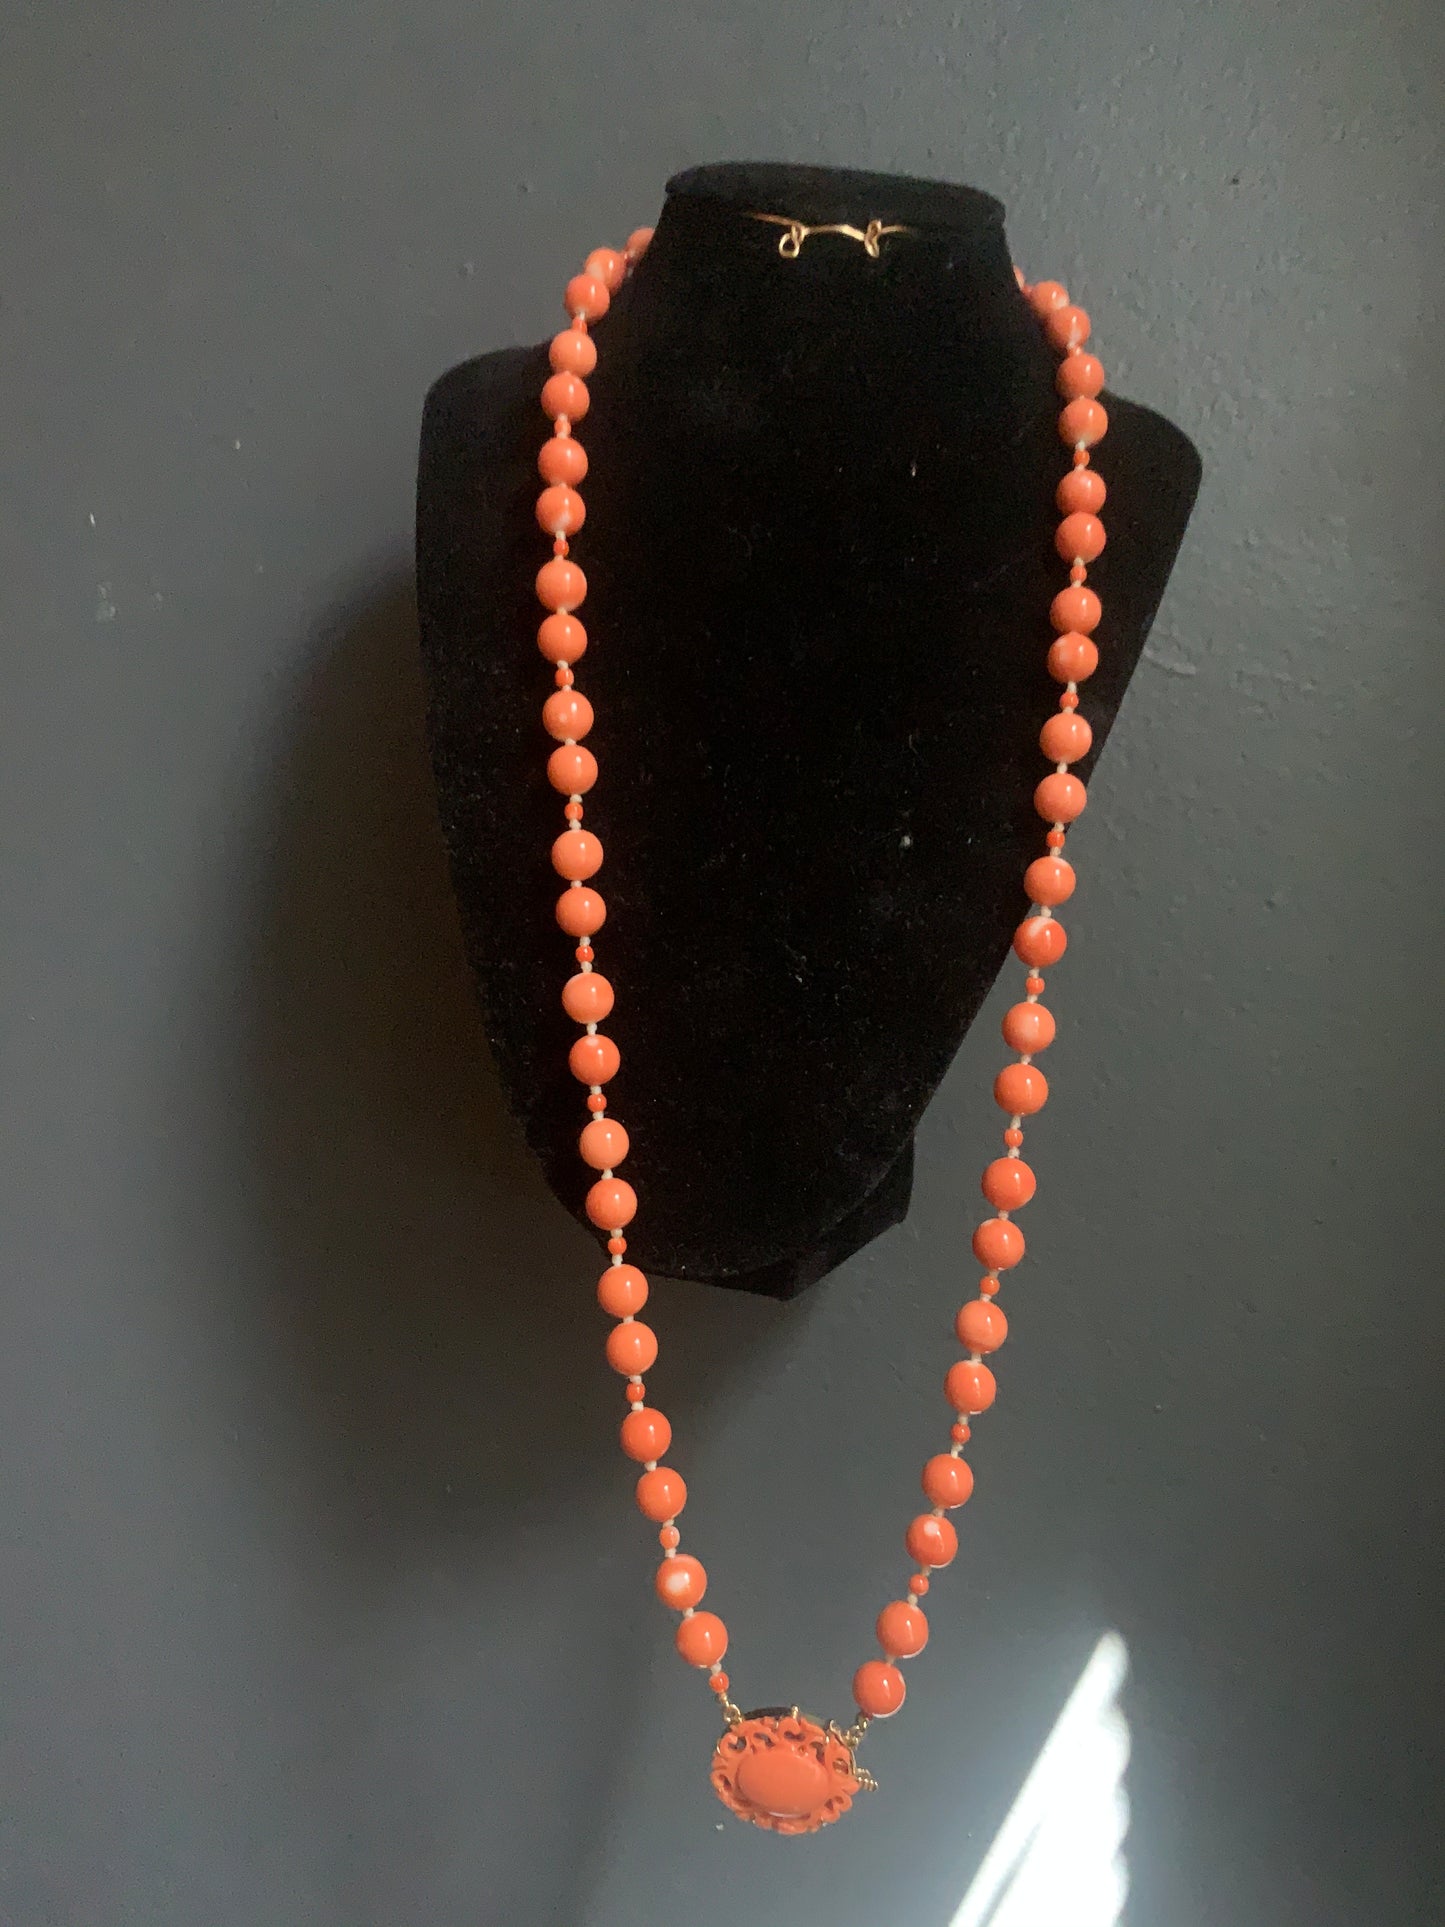 Coral necklace with 14k coral clasp